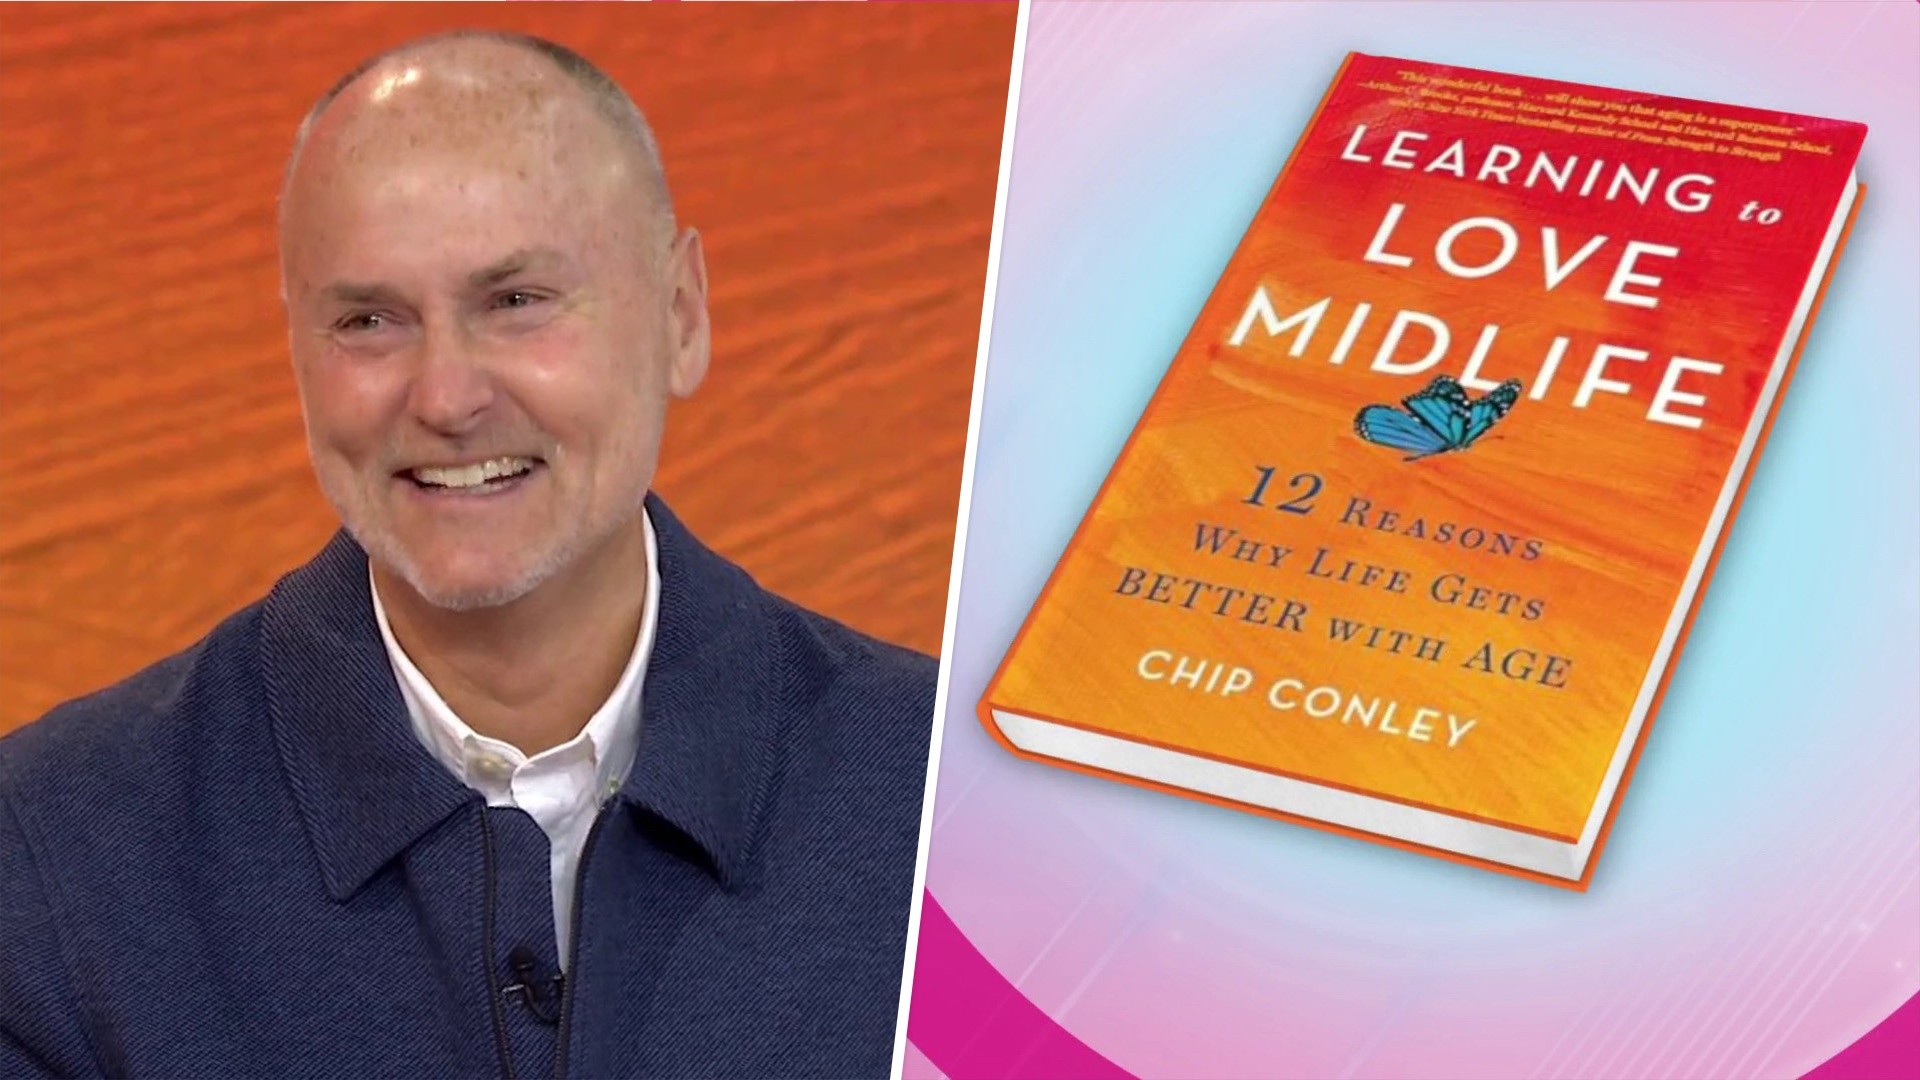 Author Chip Conley talks the upside of midlife